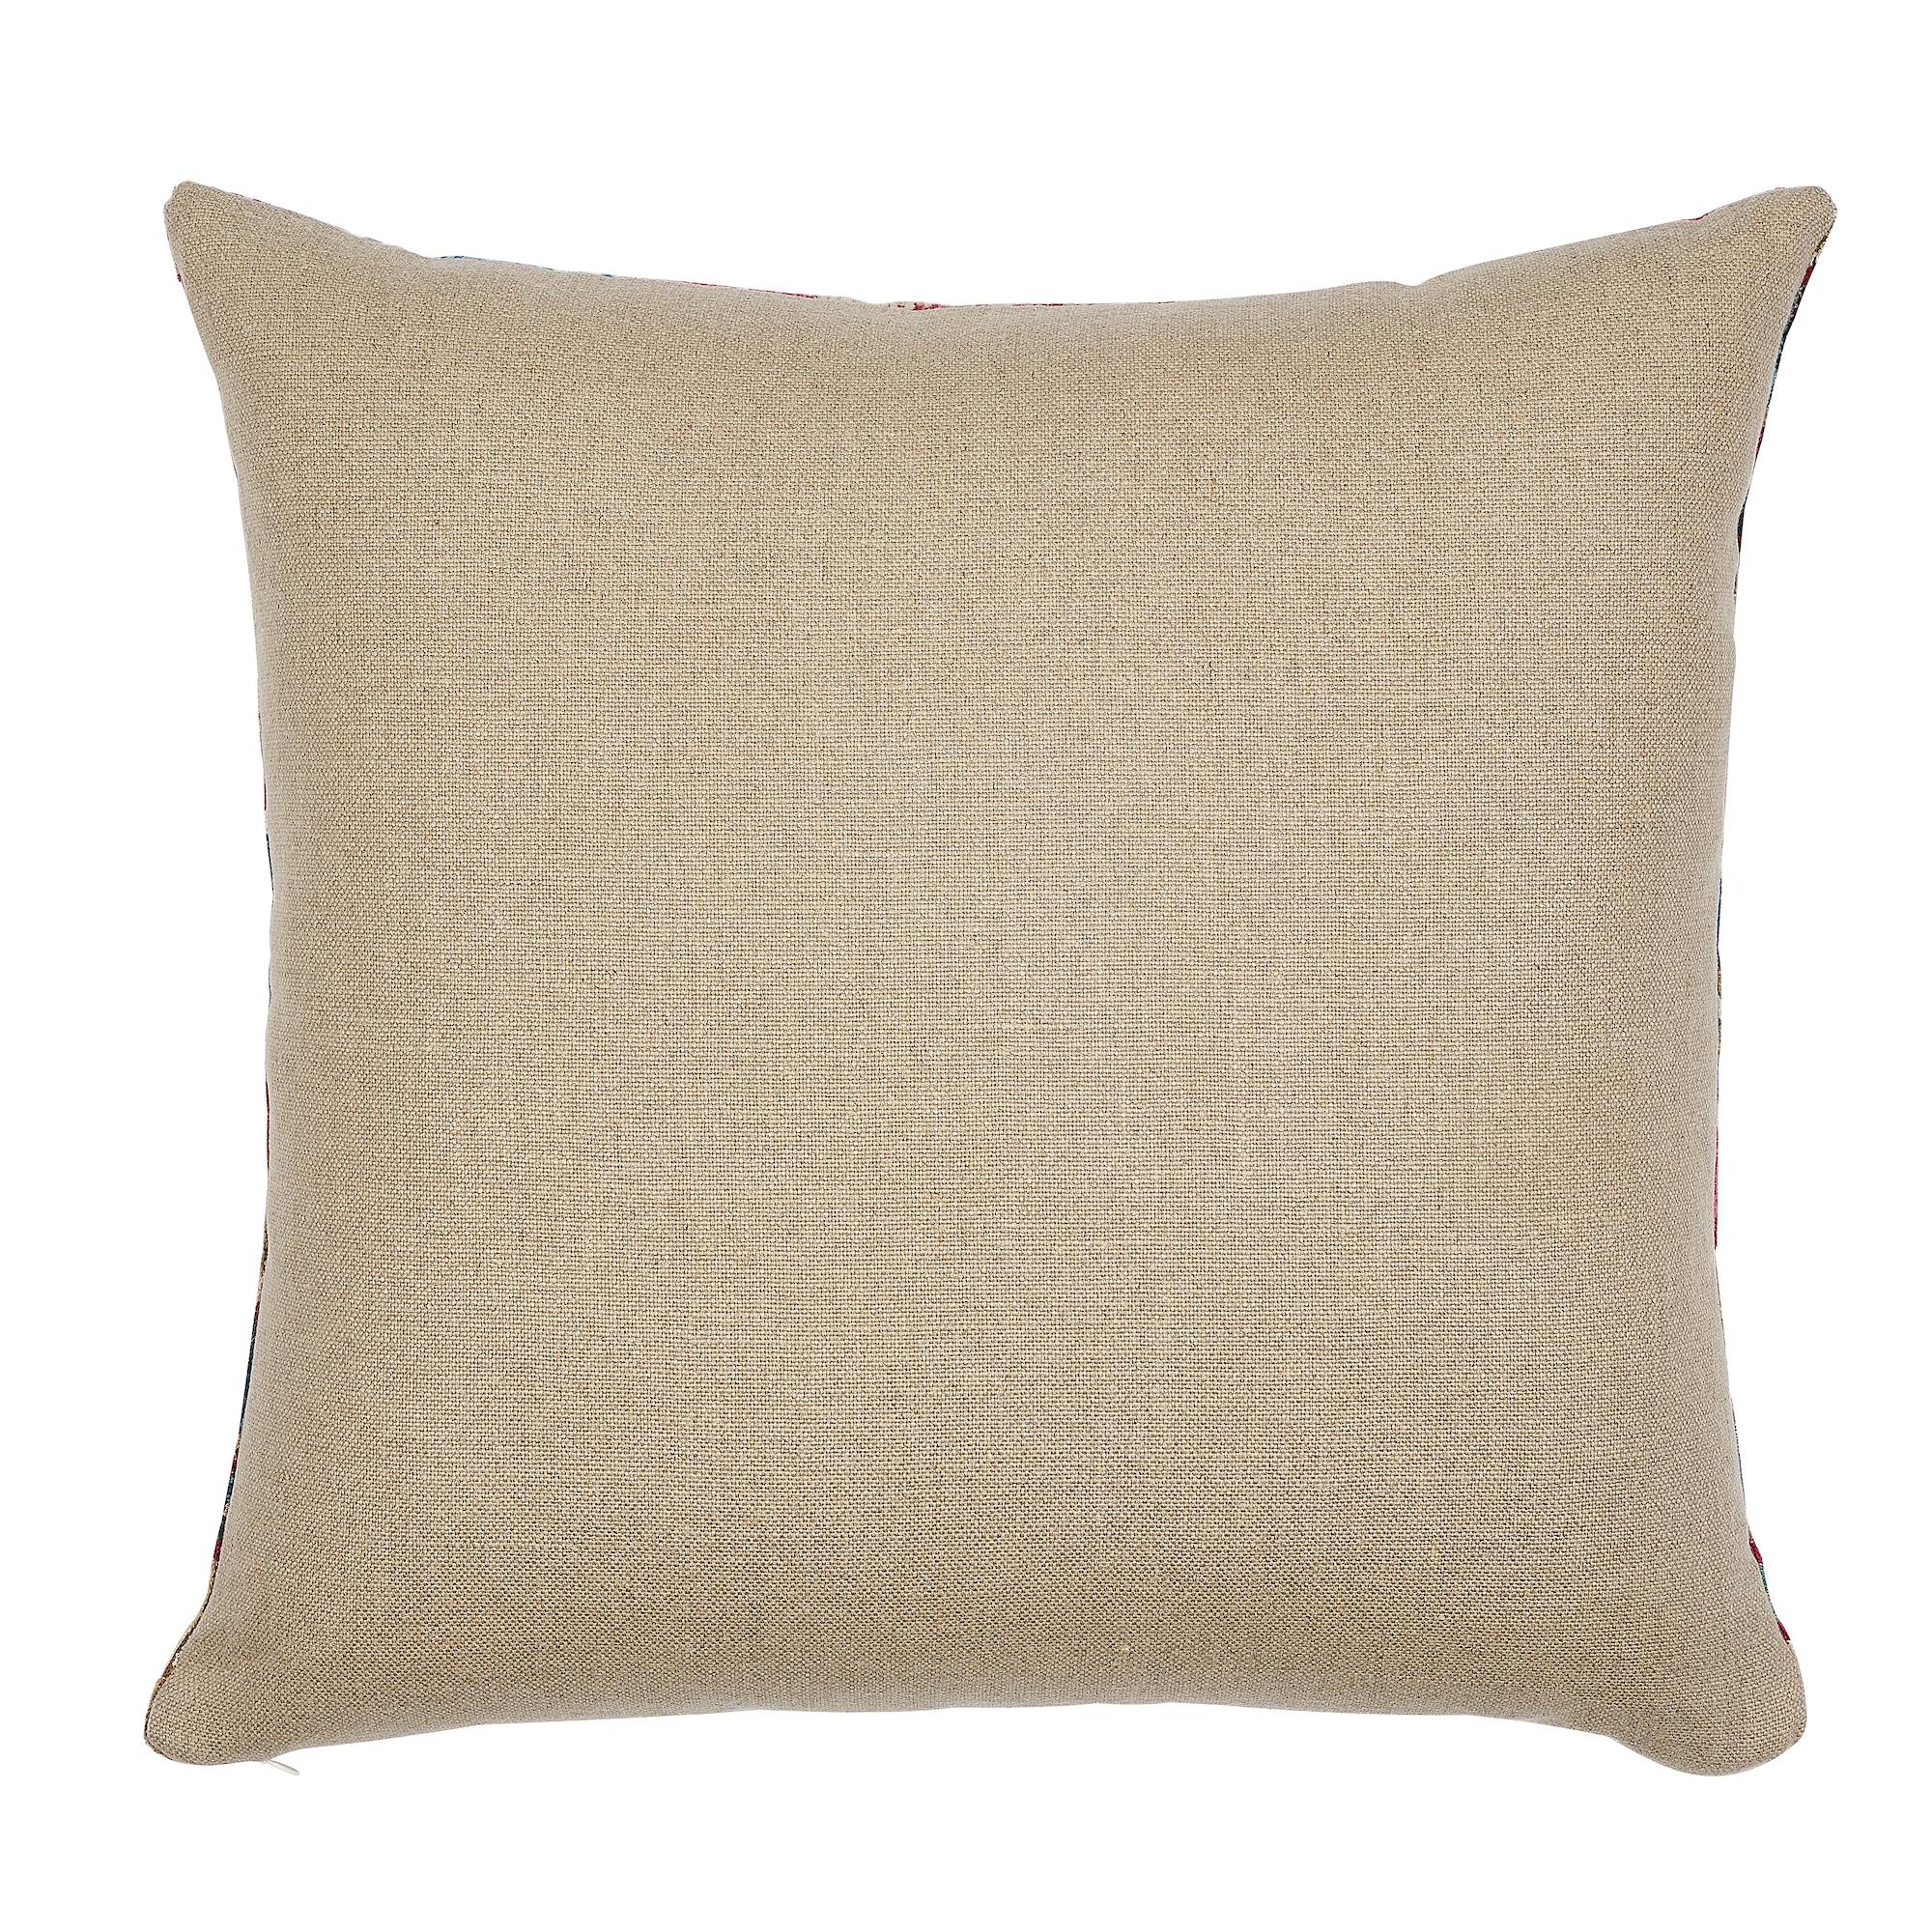 This pillow features Bezique Flamestitch with a knife edge finish. This Old World motif packs a lot of pizzazz into a coordinate that will deftly pull a room together, and has an incredibly soft, supple hand to boot. Back of pillow is Piet